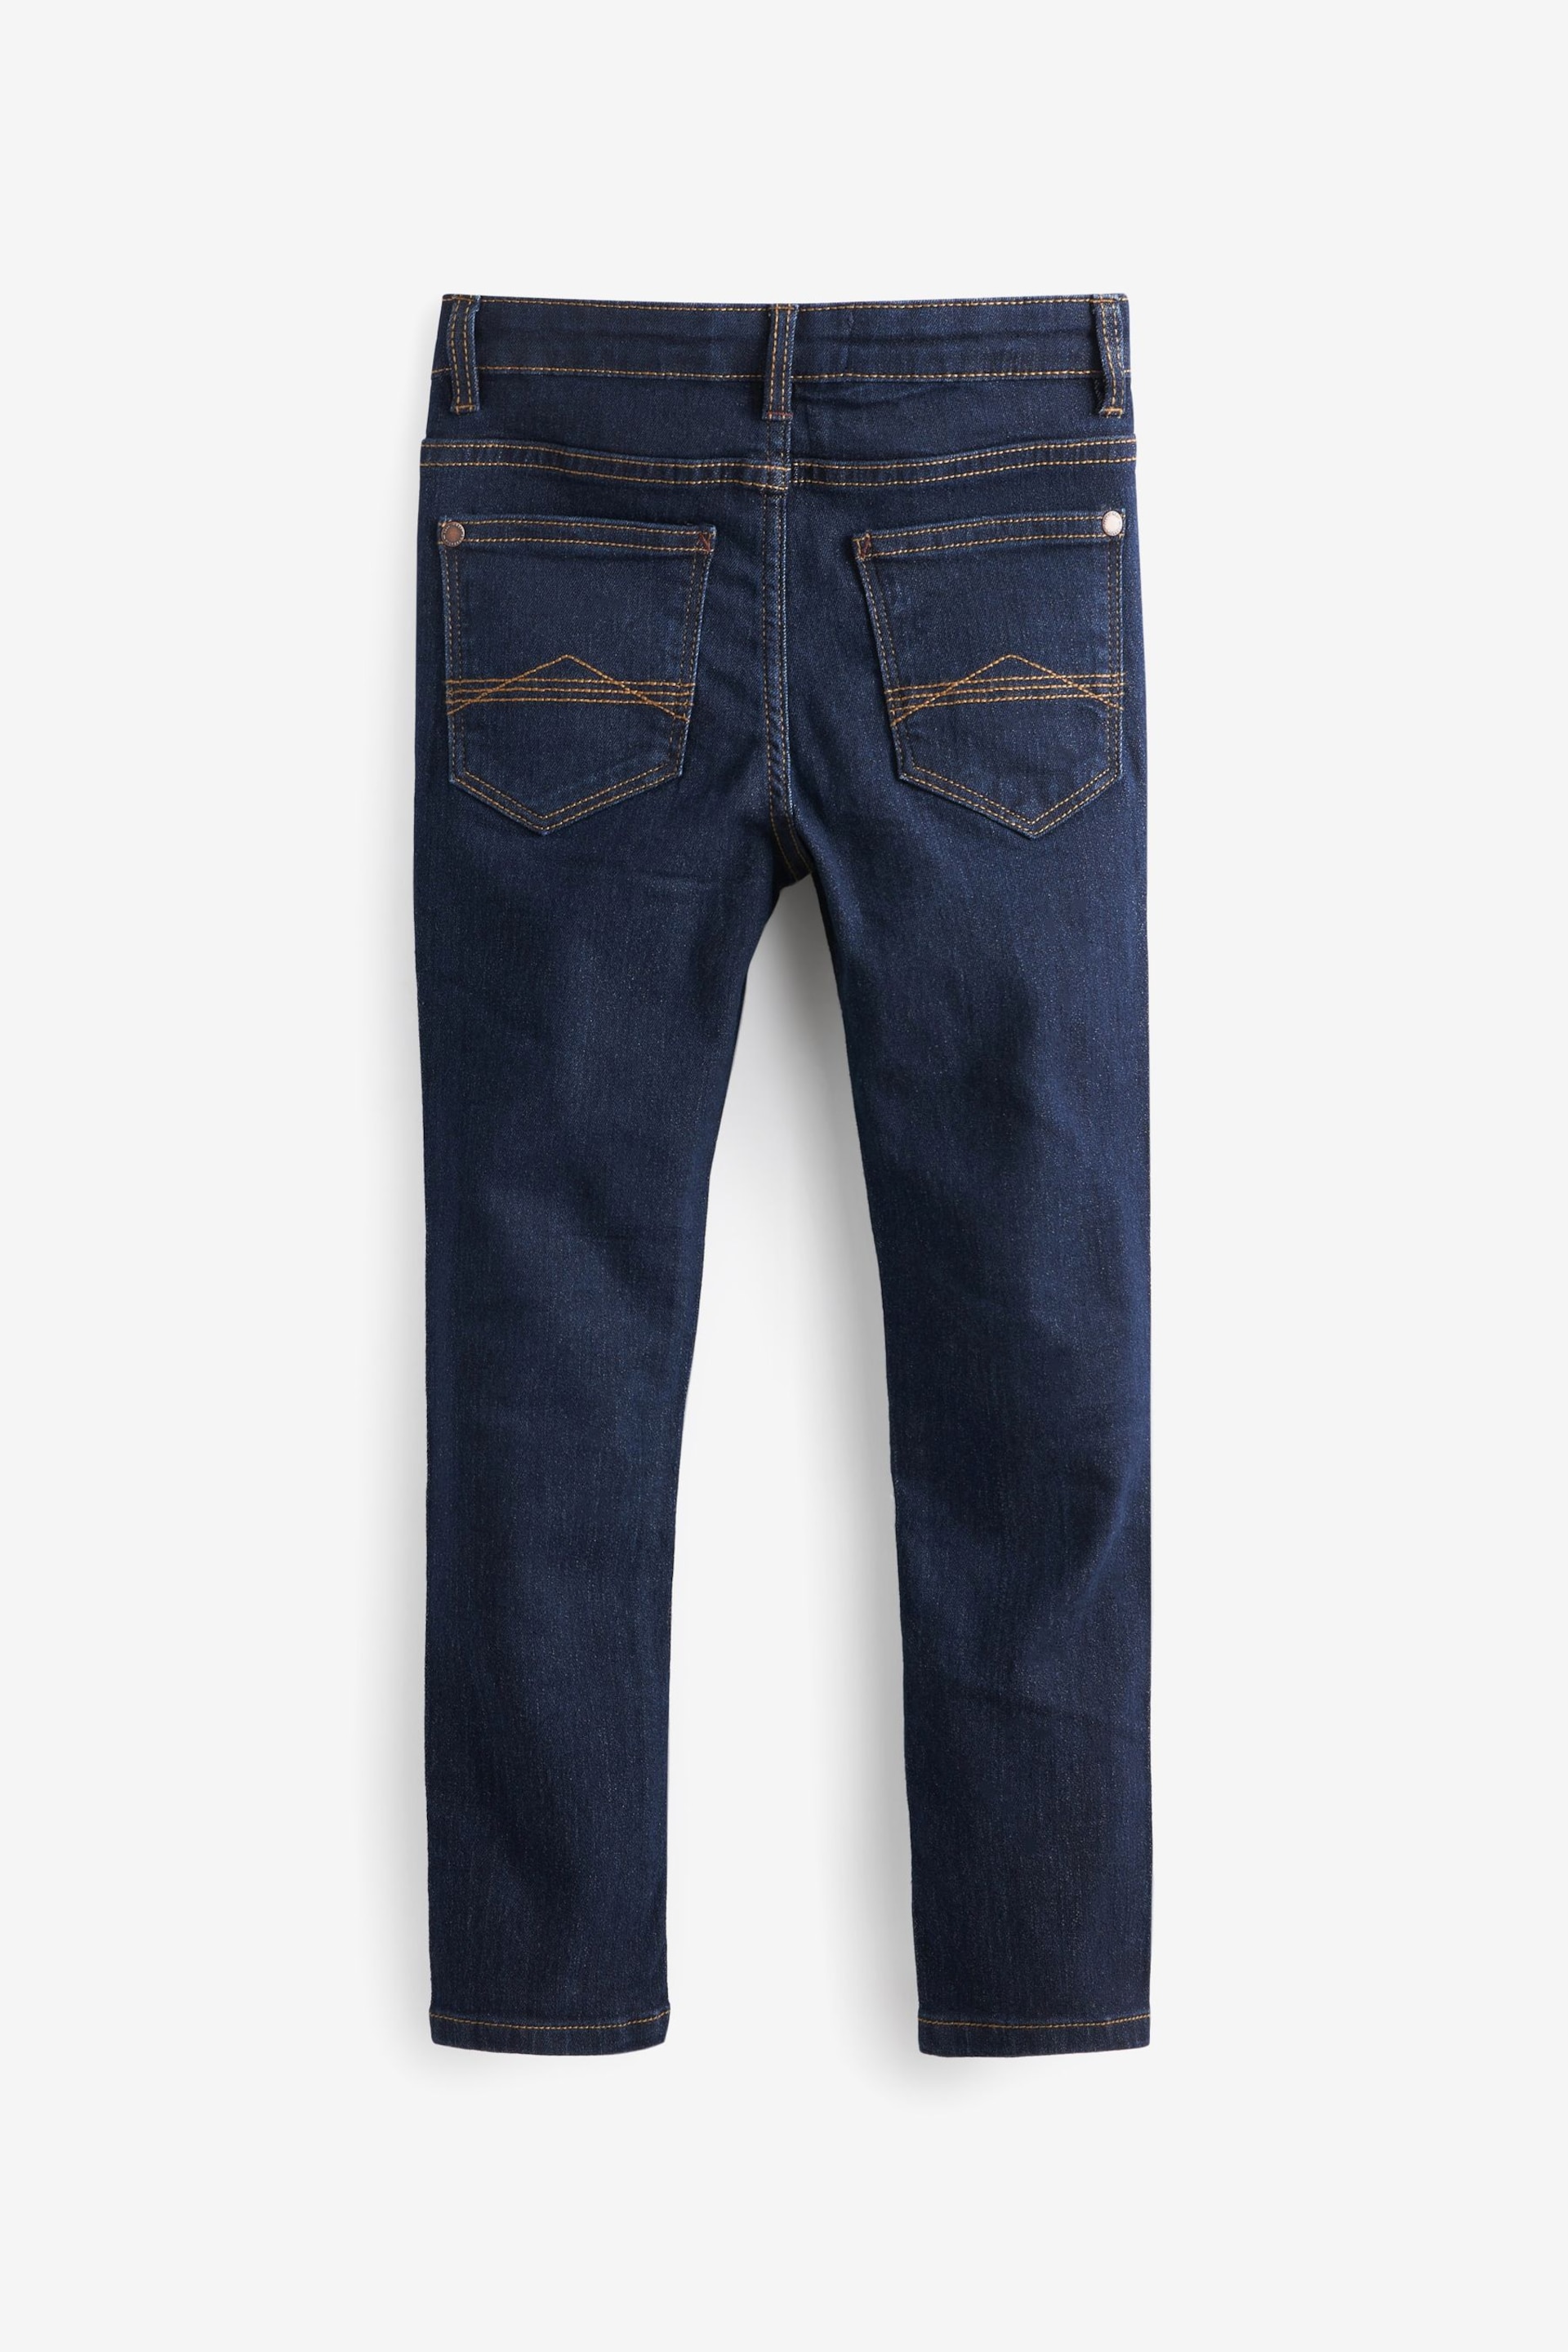 Blue Dark Super Skinny Fit Cotton Rich Stretch Jeans (3-17yrs) - Image 3 of 4